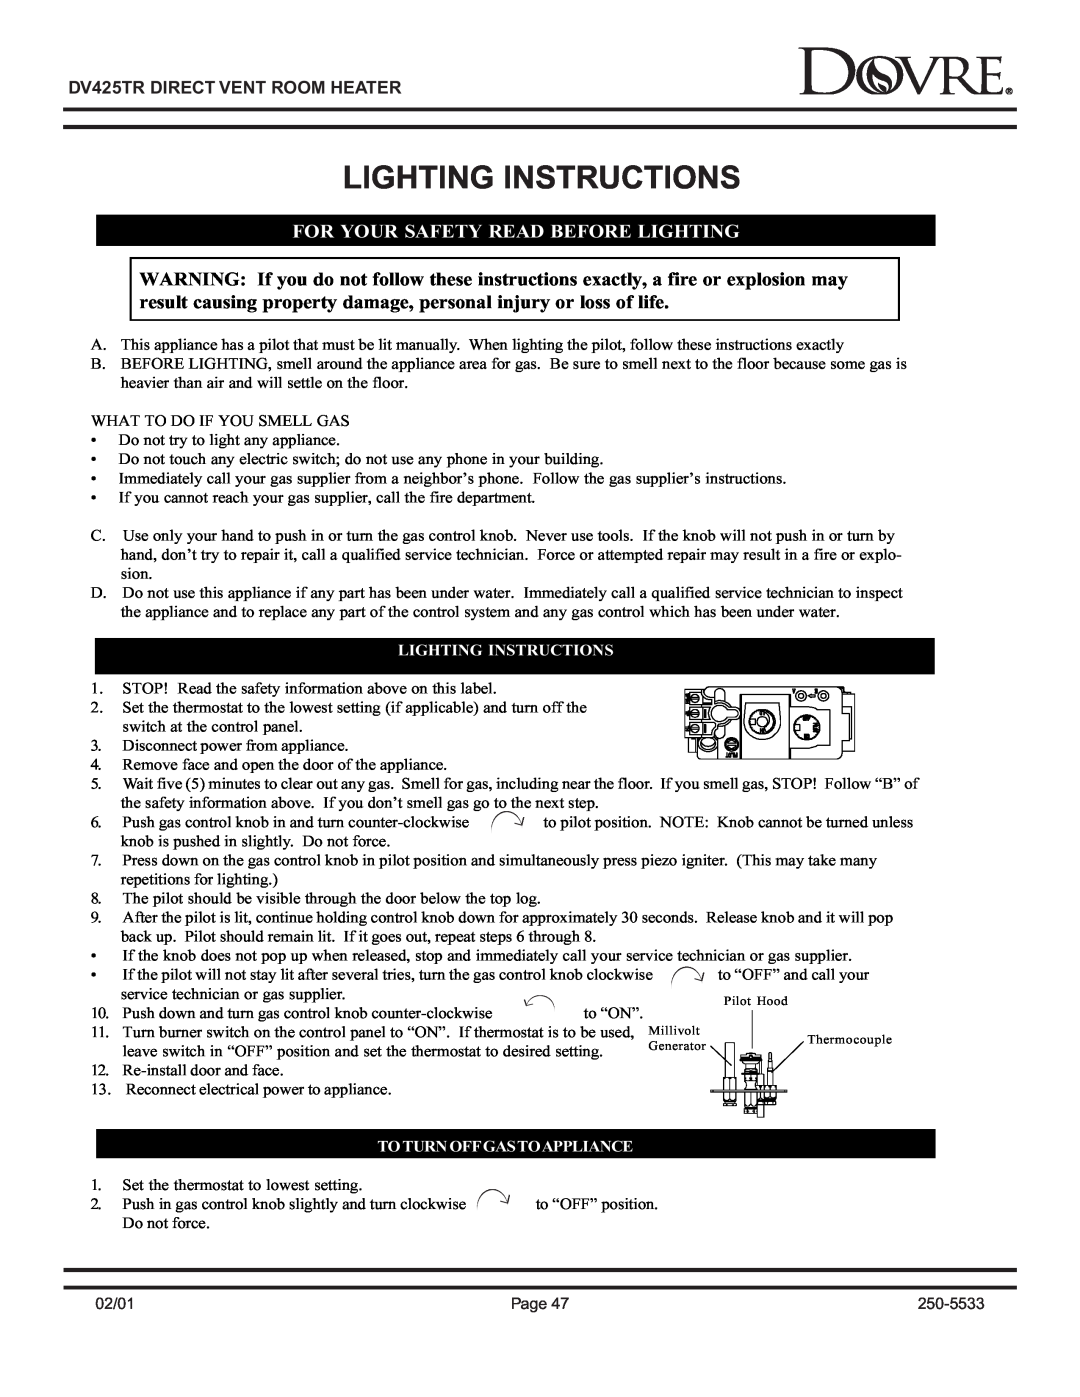 Sapphire Audio DV425TR owner manual Lighting Instructions, For Your Safety Read Before Lighting, Toturnoffgastoappliance 